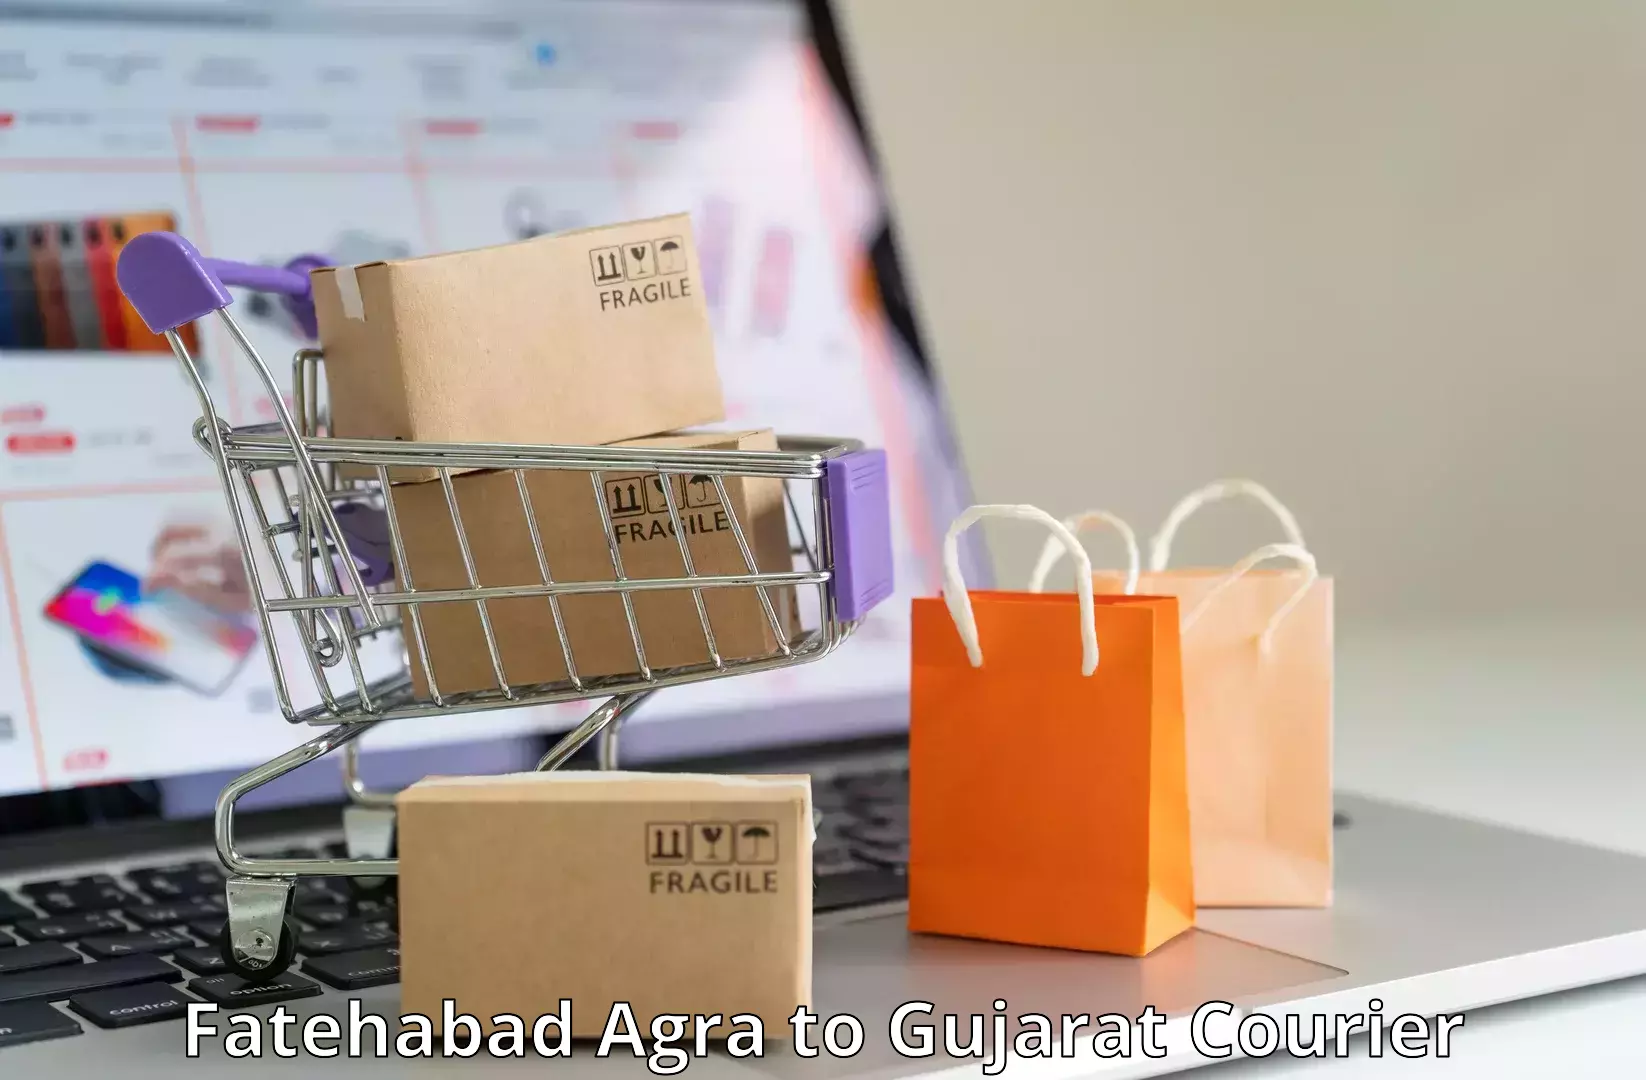 Bulk courier orders Fatehabad Agra to Gondal